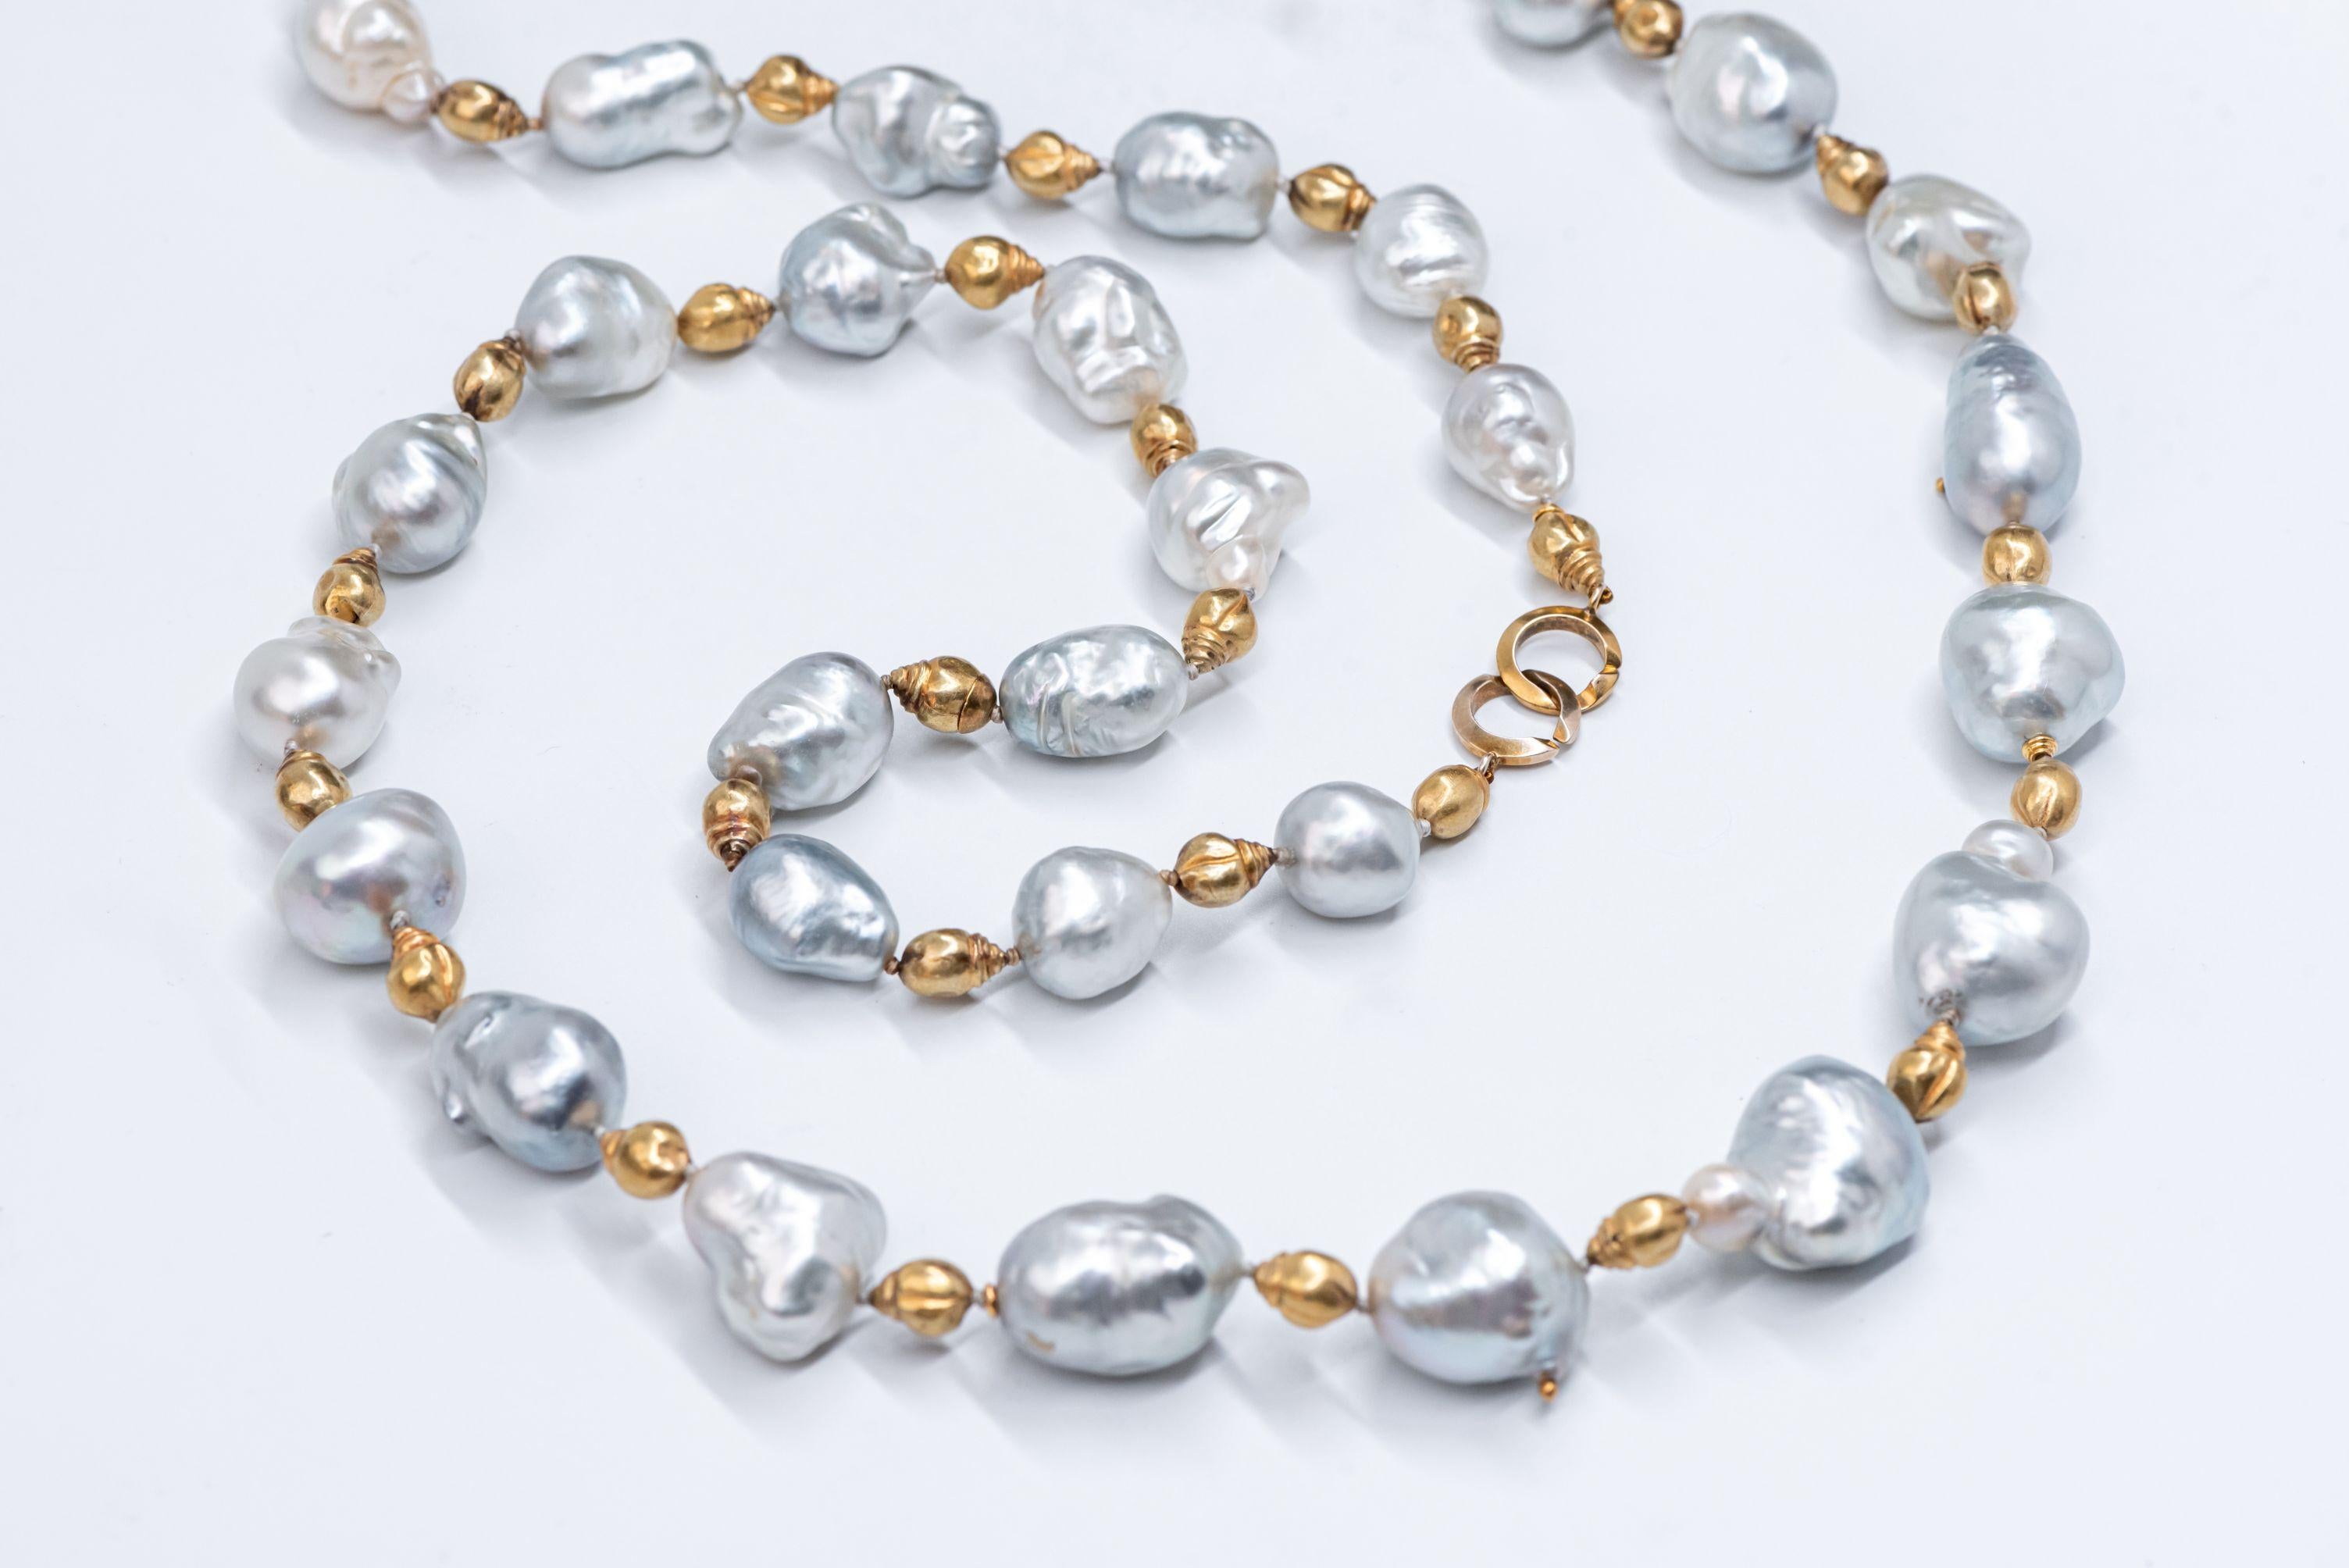 14 Century Gold Beads Oversized Blueish Baroque South Sea Pearls Beaded Necklace For Sale 11